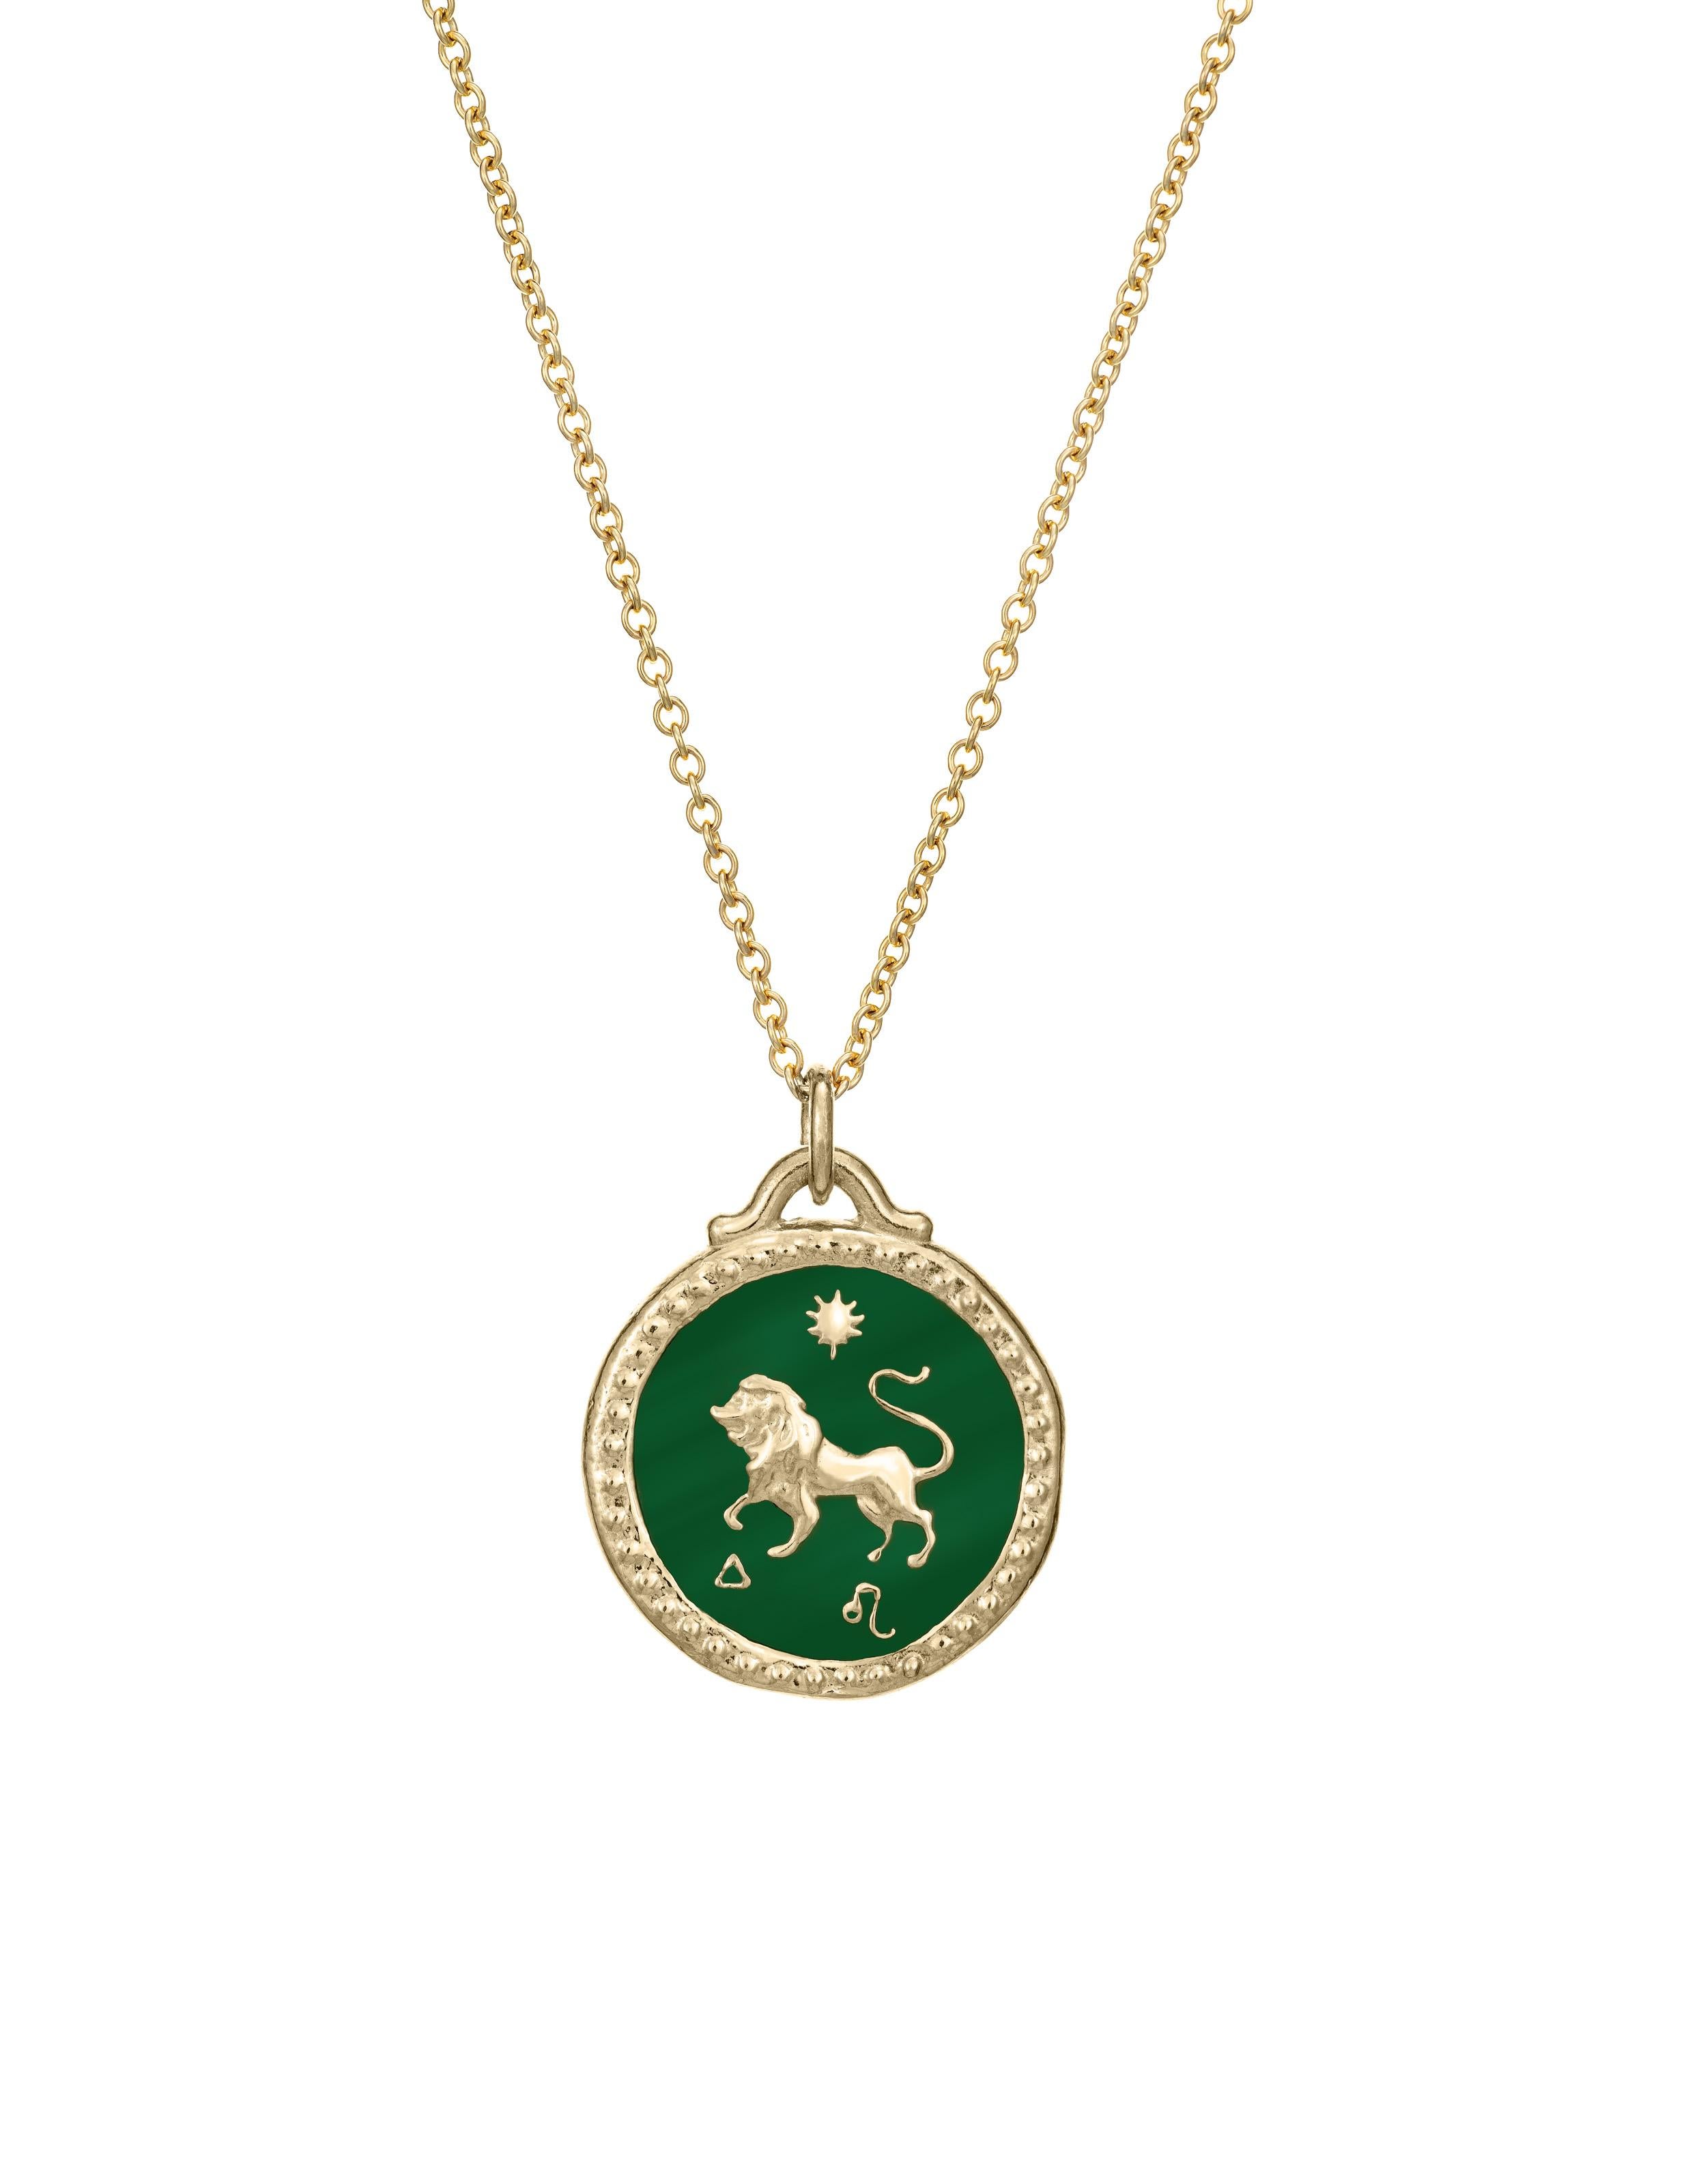 Part of our new Zodiac collection. The Leo Pendant features a lion on one side and the Leo symbol on the other. Designs are meticulously hand-carved into 14k gold and finished with enamel. This pendant is customizable and available in four enamel